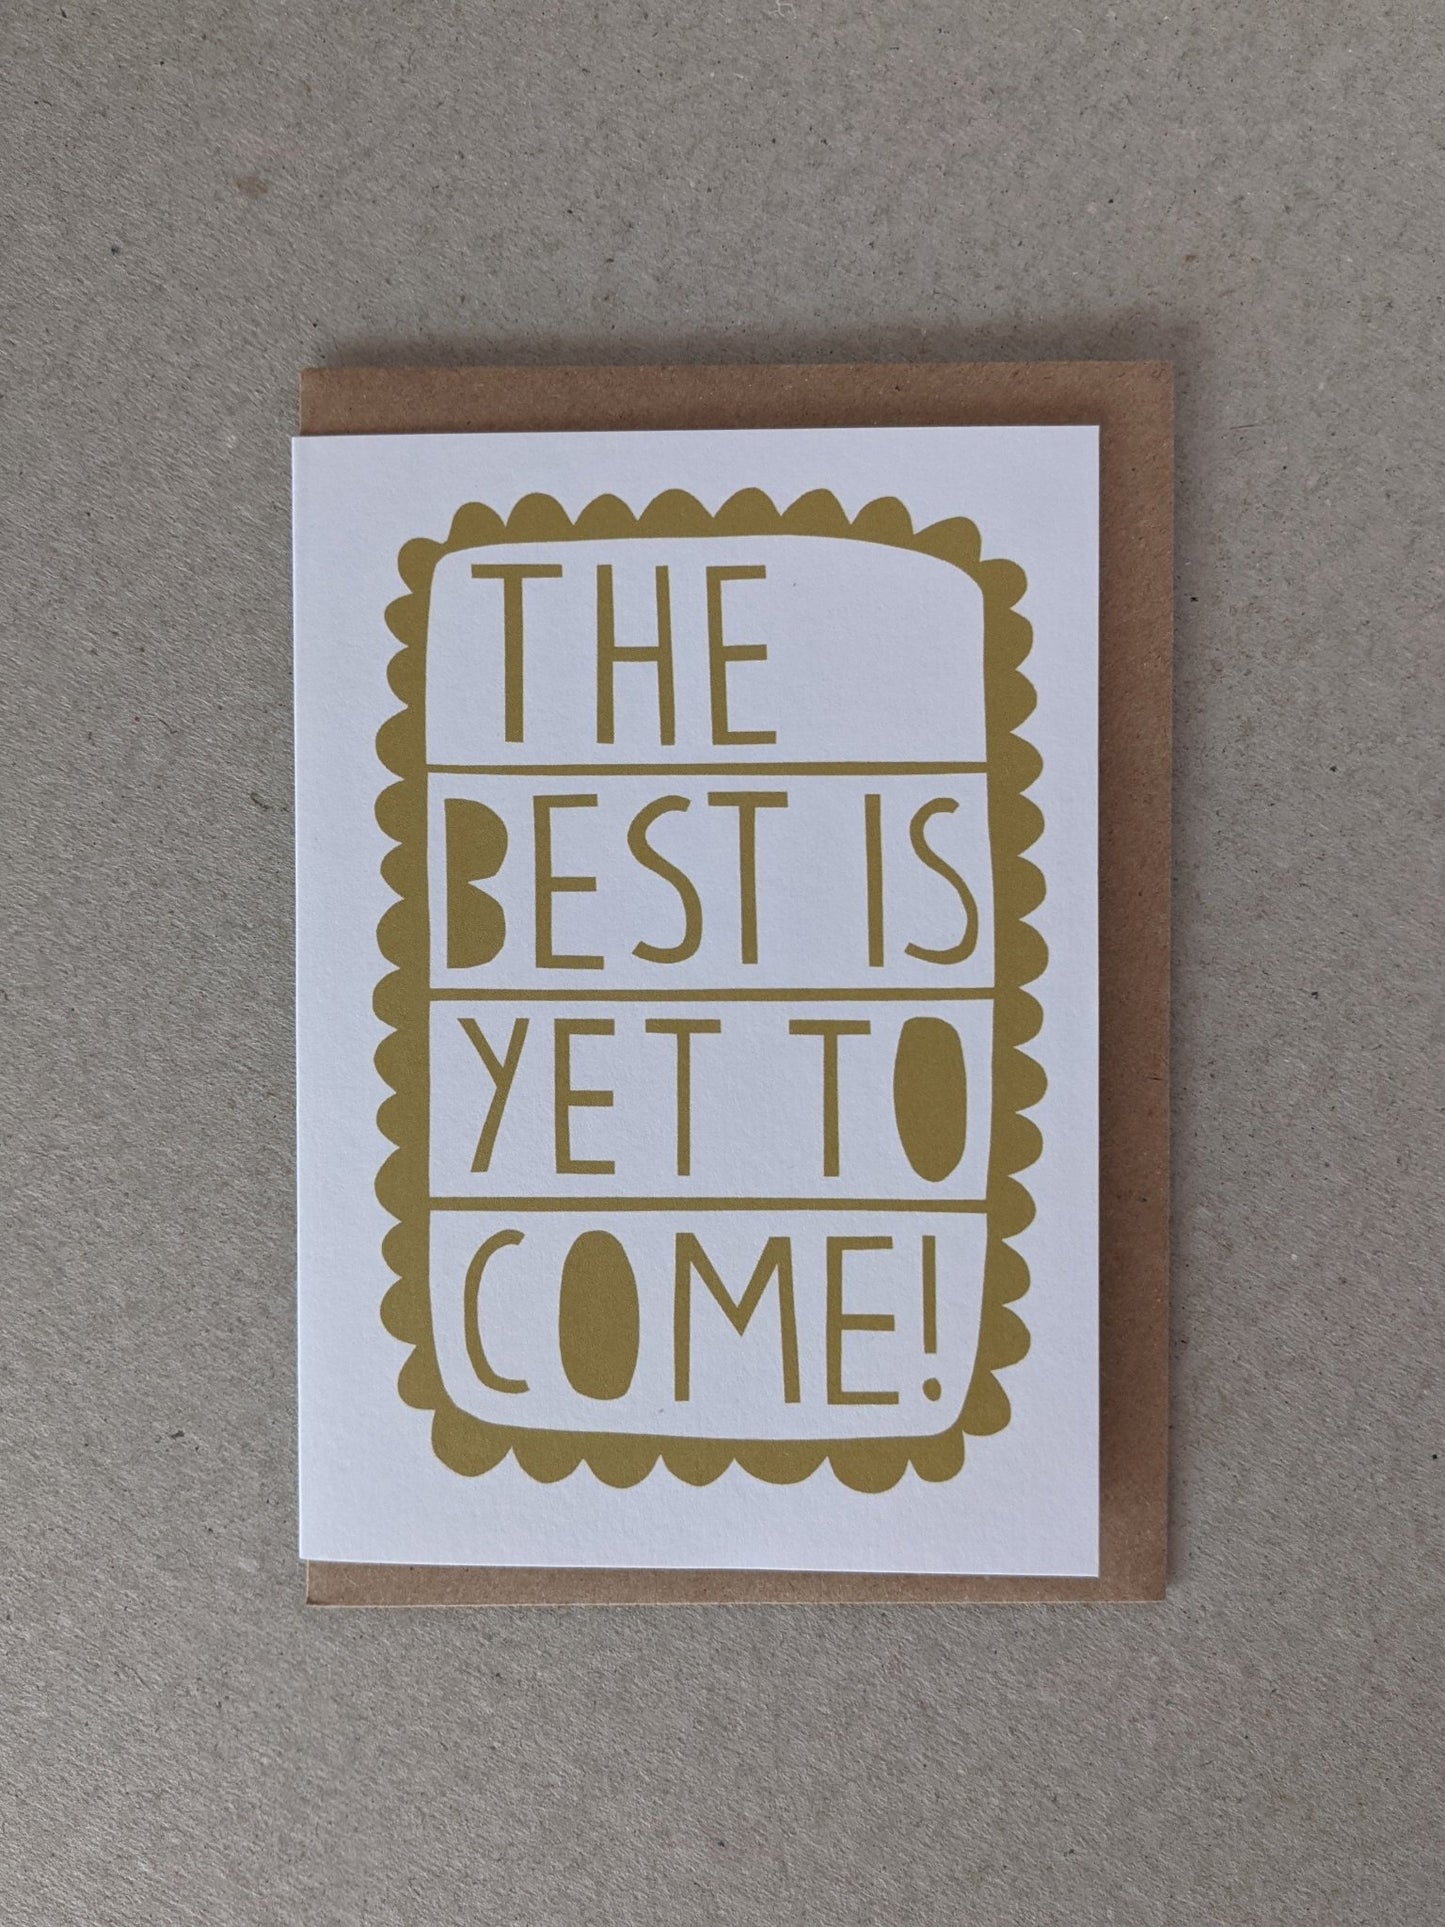 Best Is Yet To Come Greetings Card - The Stationery Cupboard